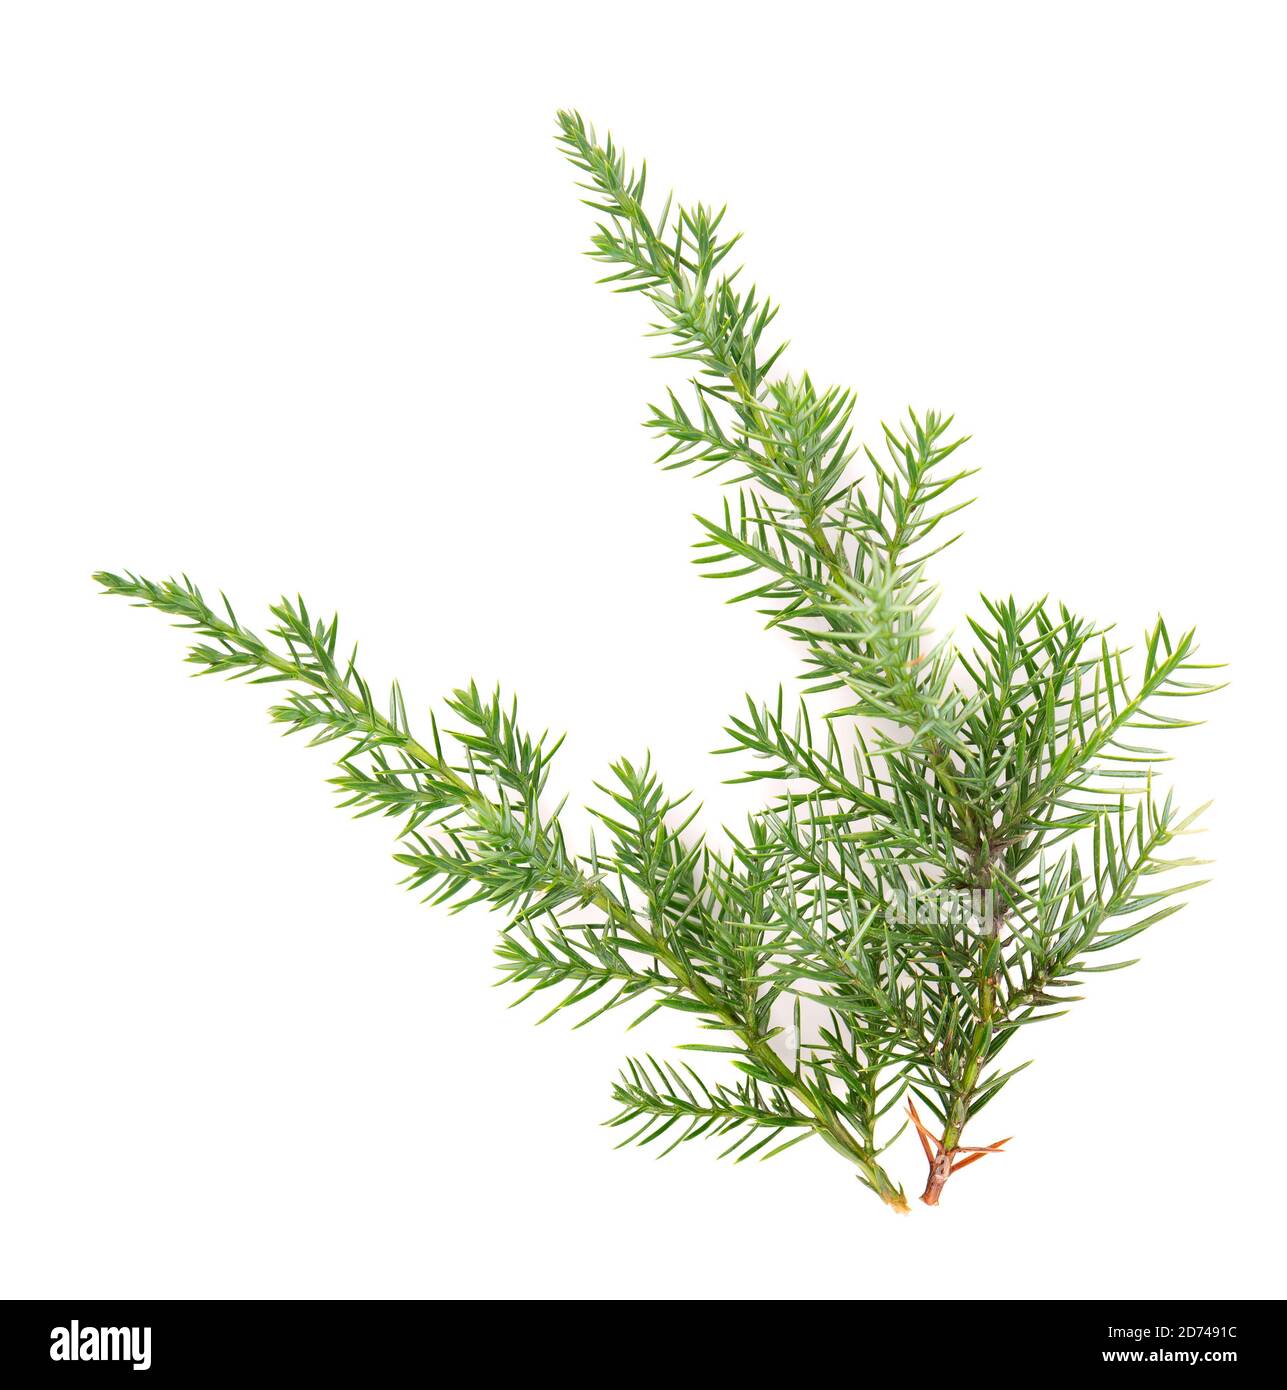 Juniper green branch, isolated on white background. Ornamental plants ...